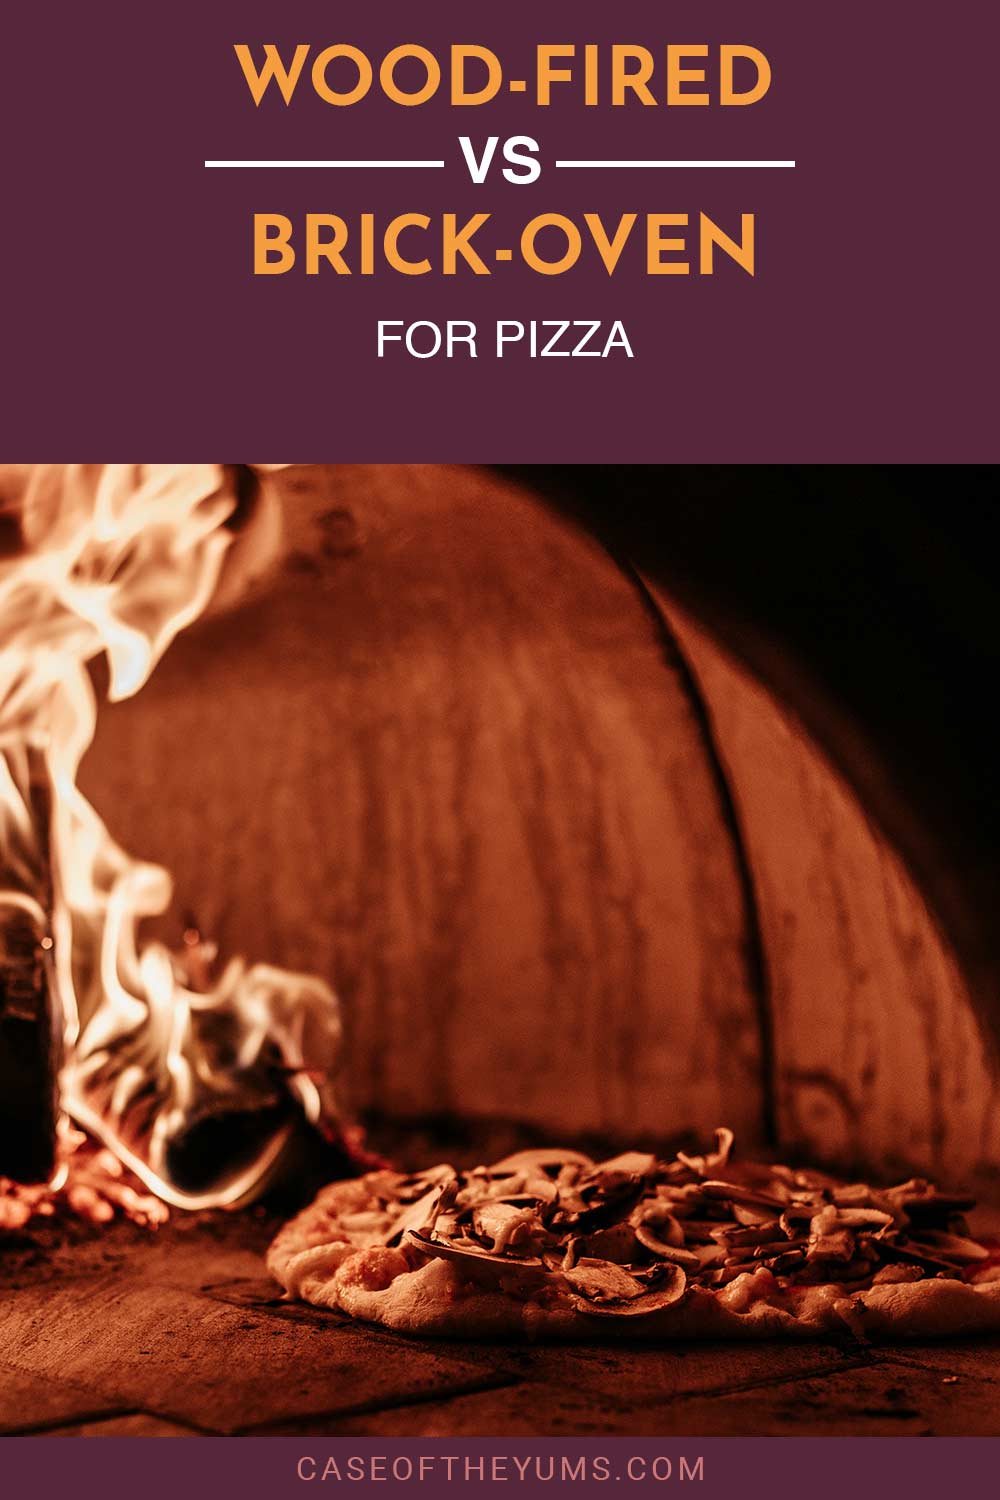 A pizza in a flaming oven - Wood-Fired vs. Brick-Oven for Pizza.